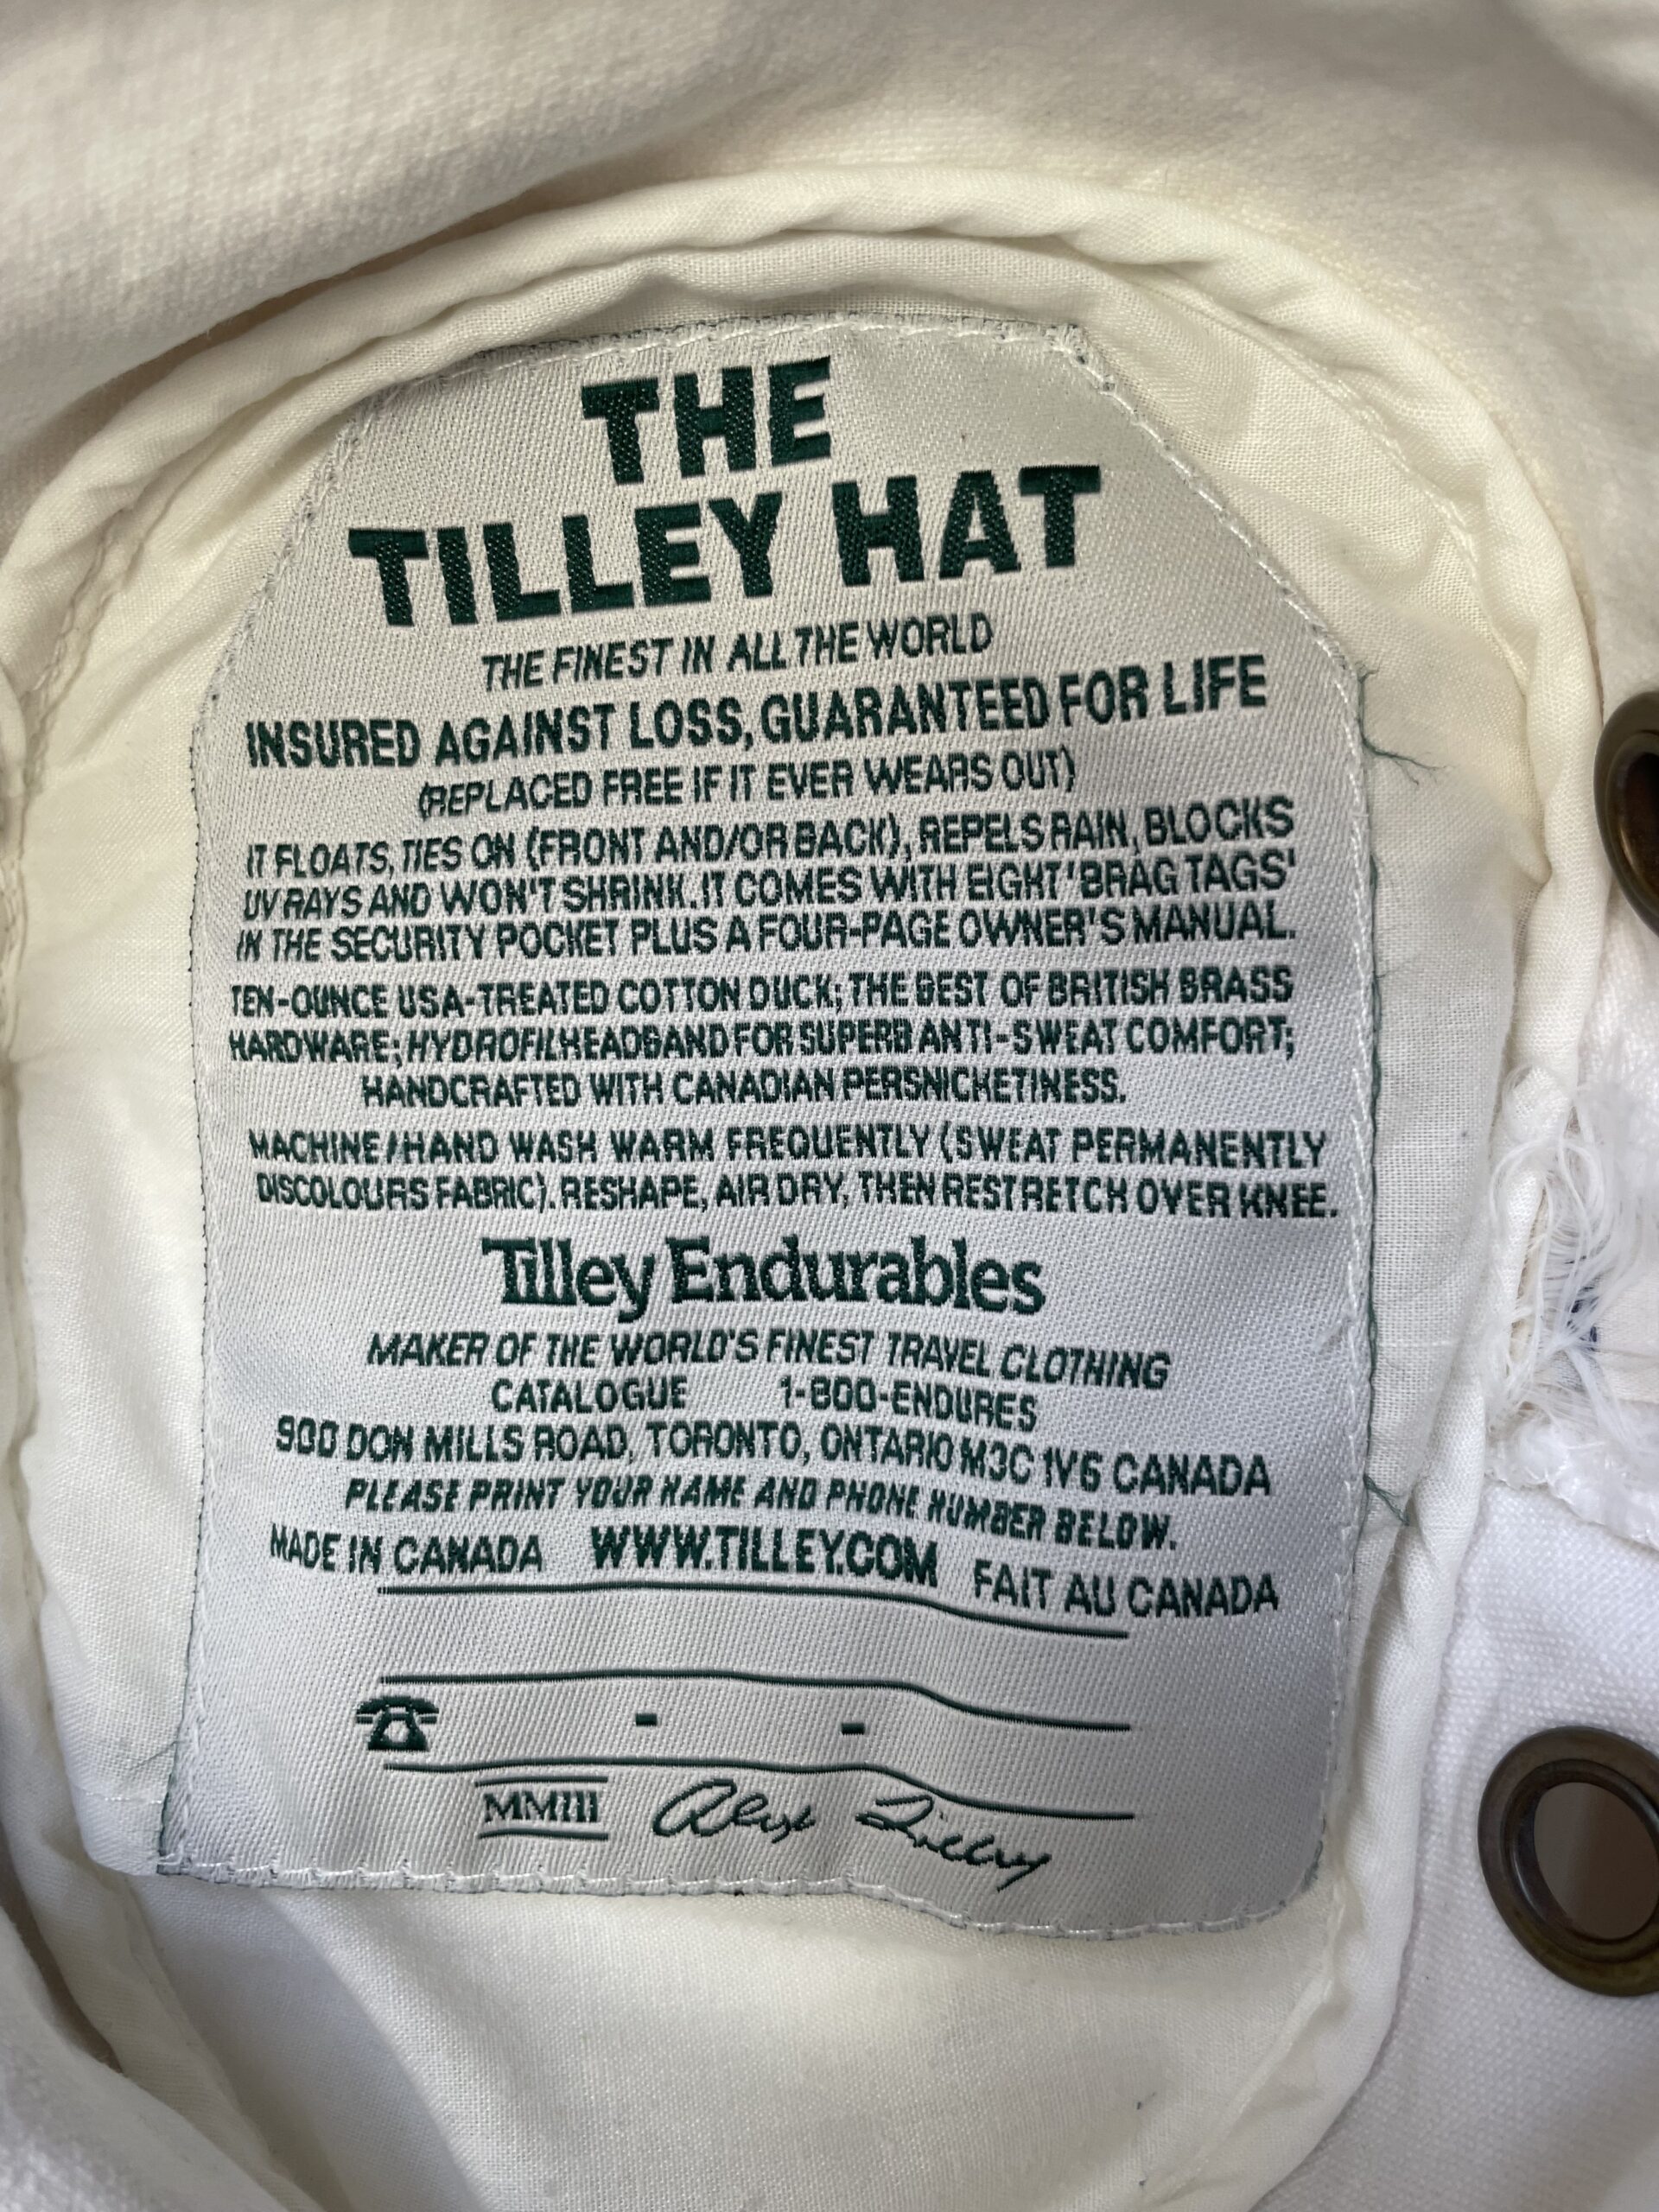 The Tilley Hat Guarantee